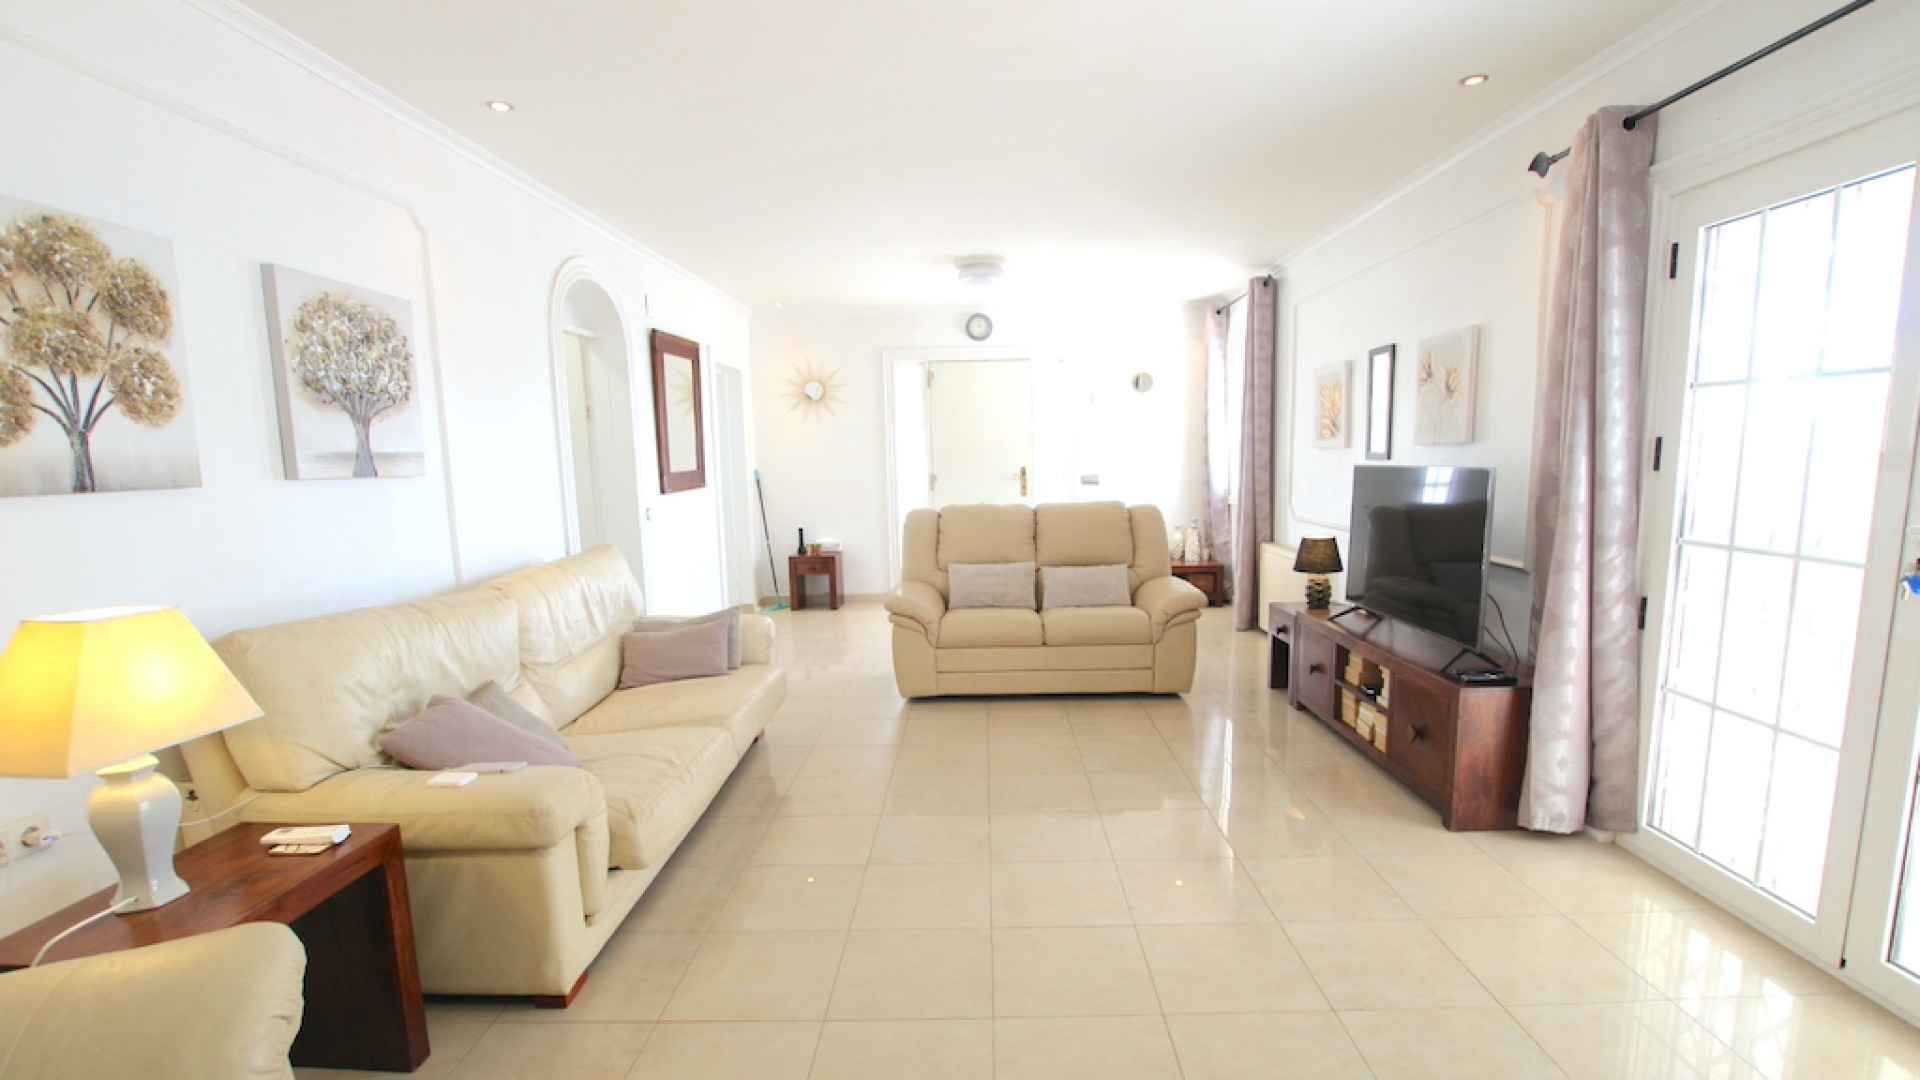 48358_expansive_4_bed_detached_villa_with_private_pool_and_garage_220224130512_img_7483